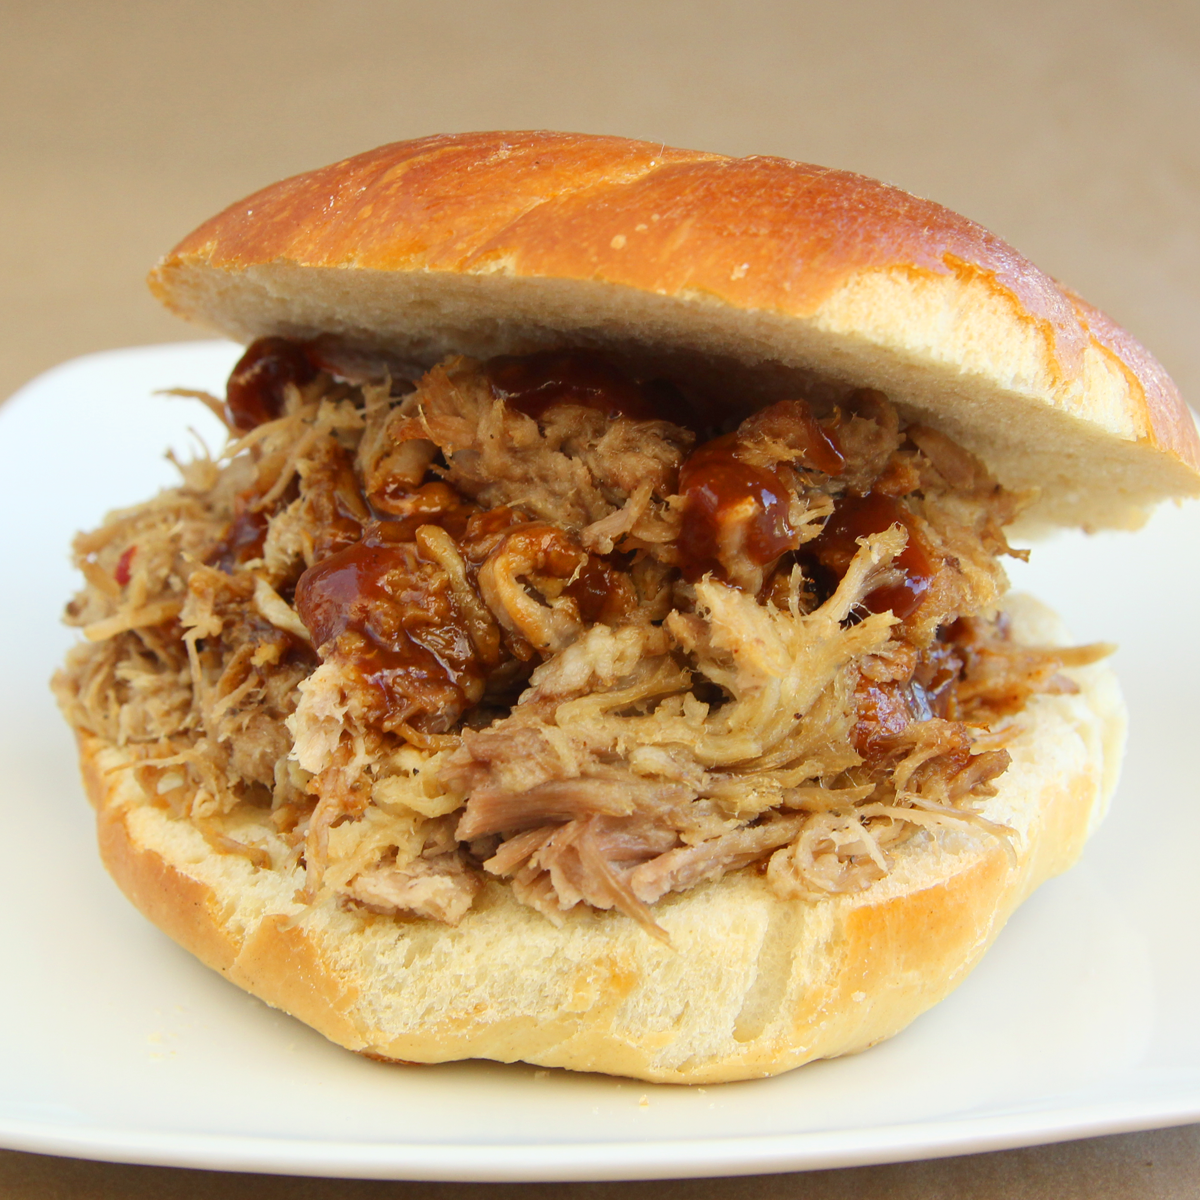   Traditional Carolina Pulled Pork BBQ - Feast for 6-8 People  